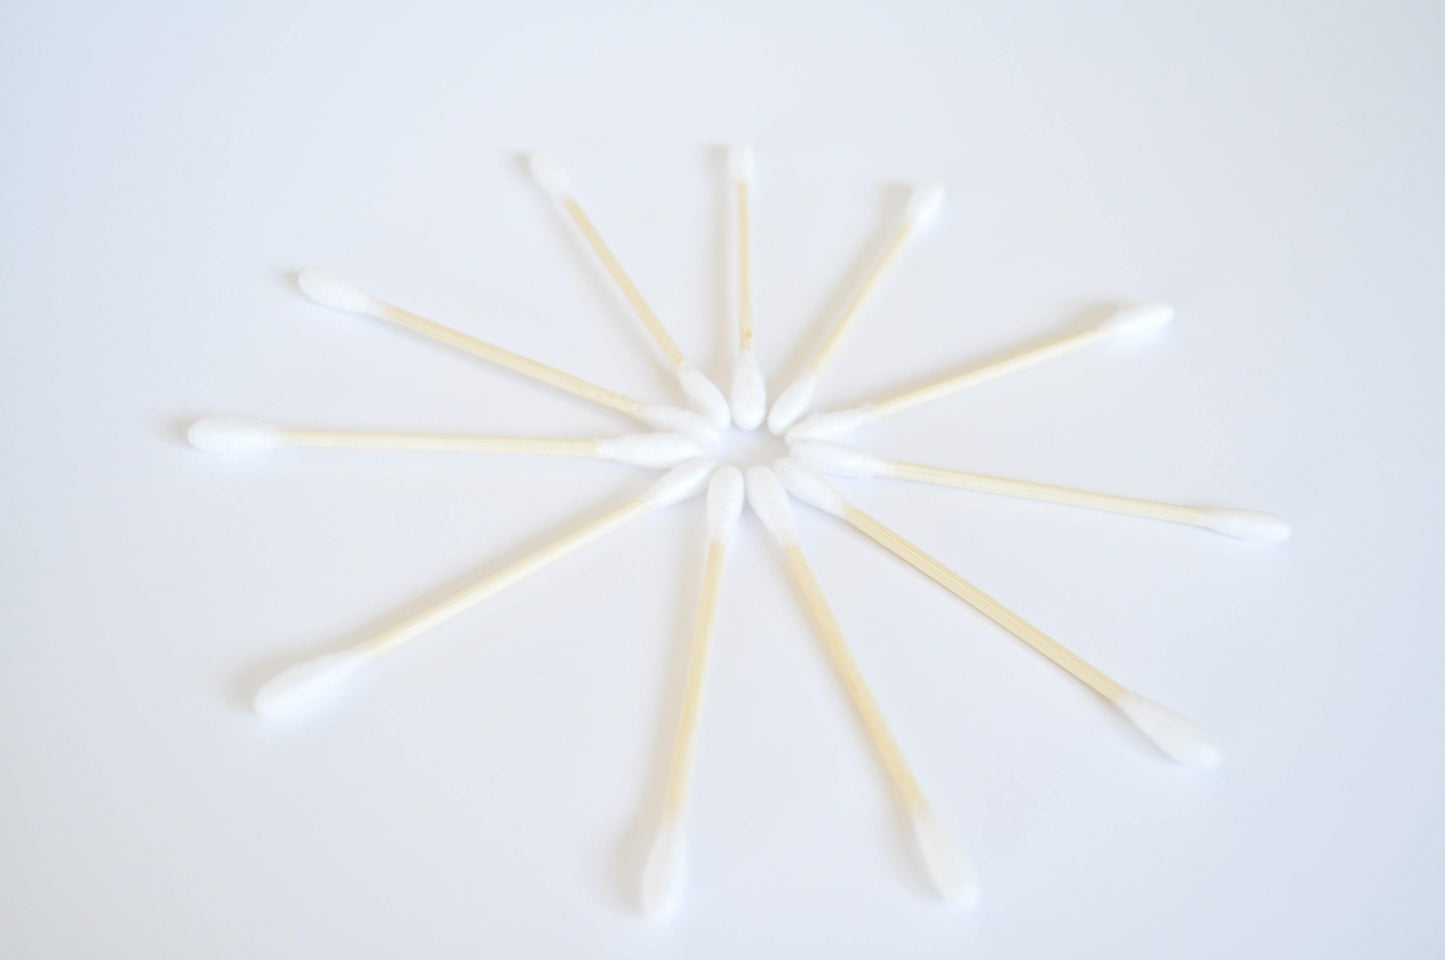 Bamboo Cotton Buds - 100 PACK | Eco friendly | Plastic Free | Natural - simplyThinkECO